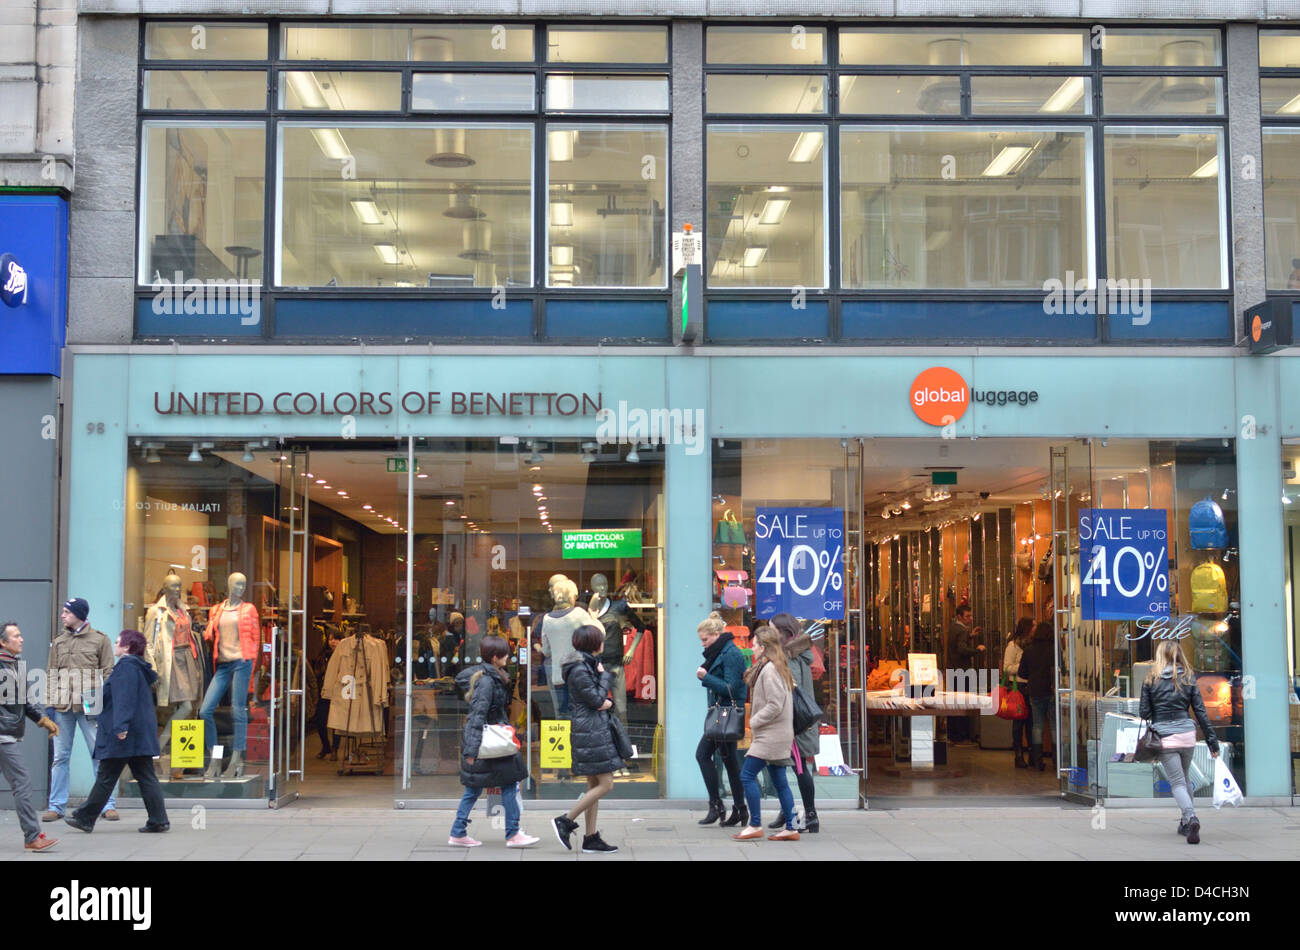 United Colors of Benetton fashion store in Oxford Street, London, UK Stock  Photo - Alamy